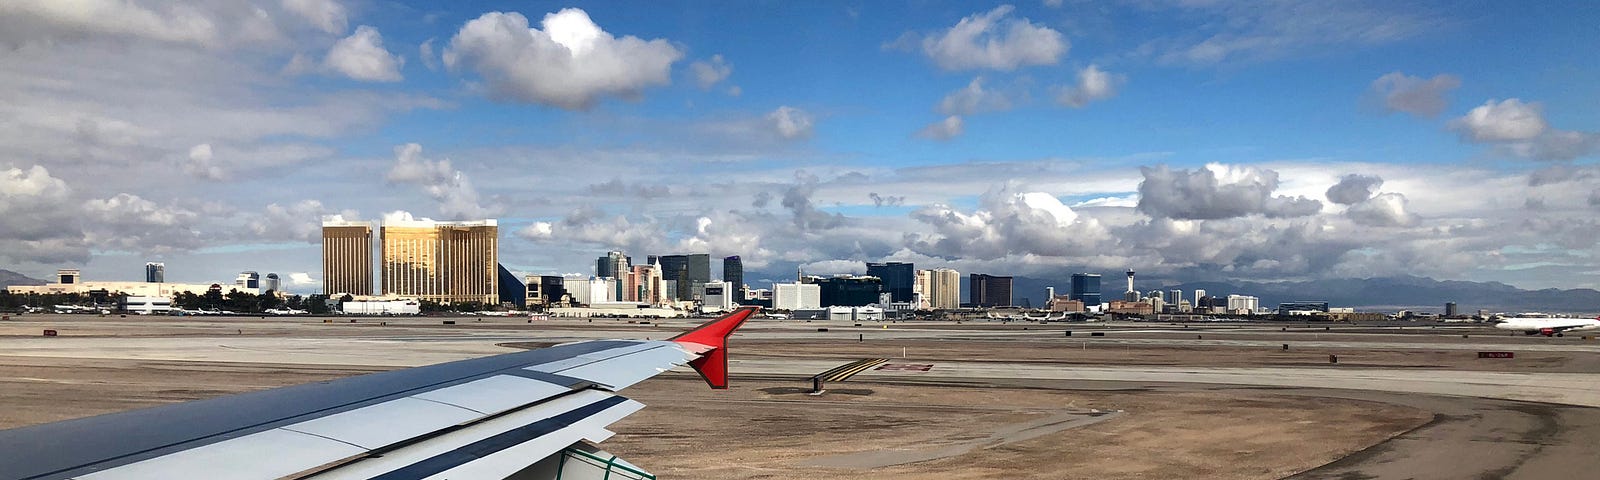 A view of Harry Reid International Airport from the runway.